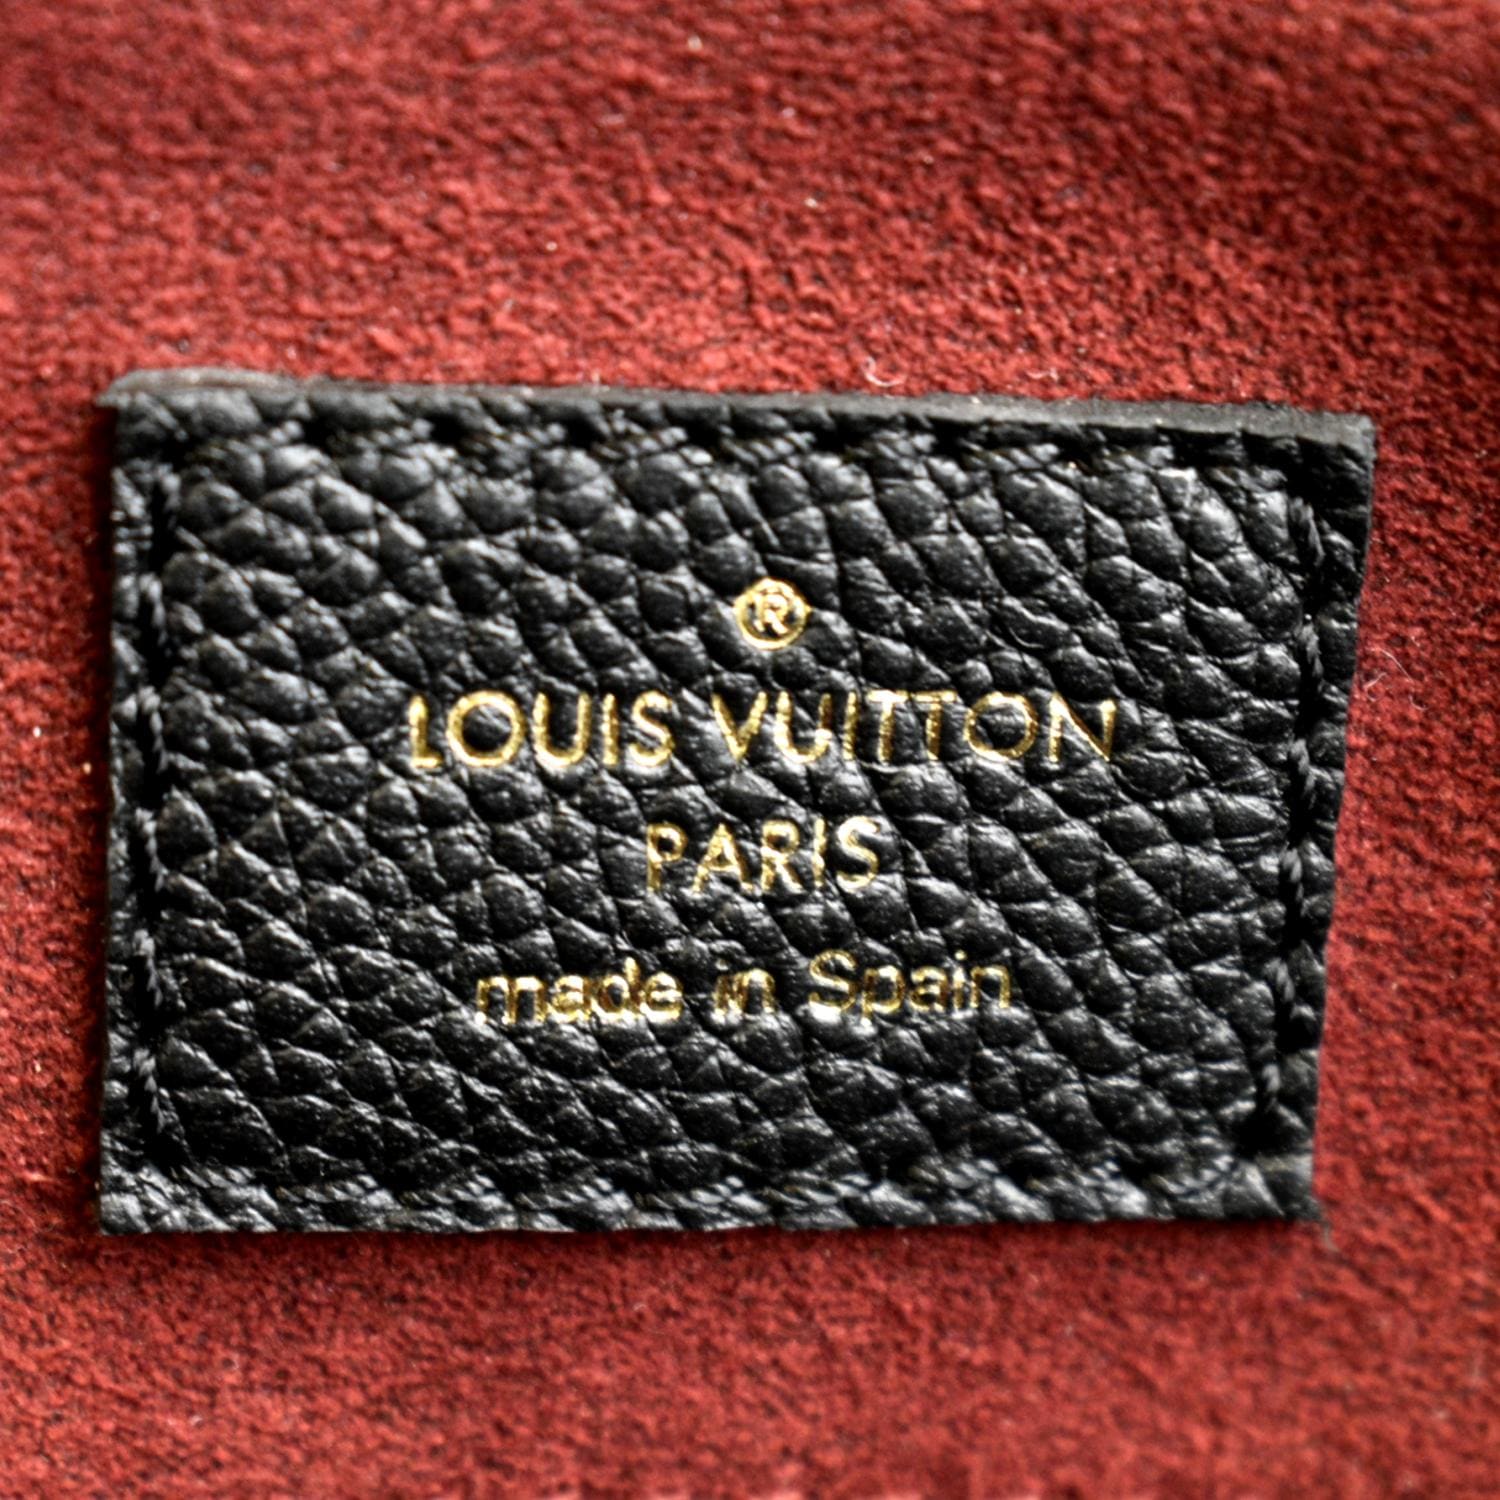 synthetic leather louis